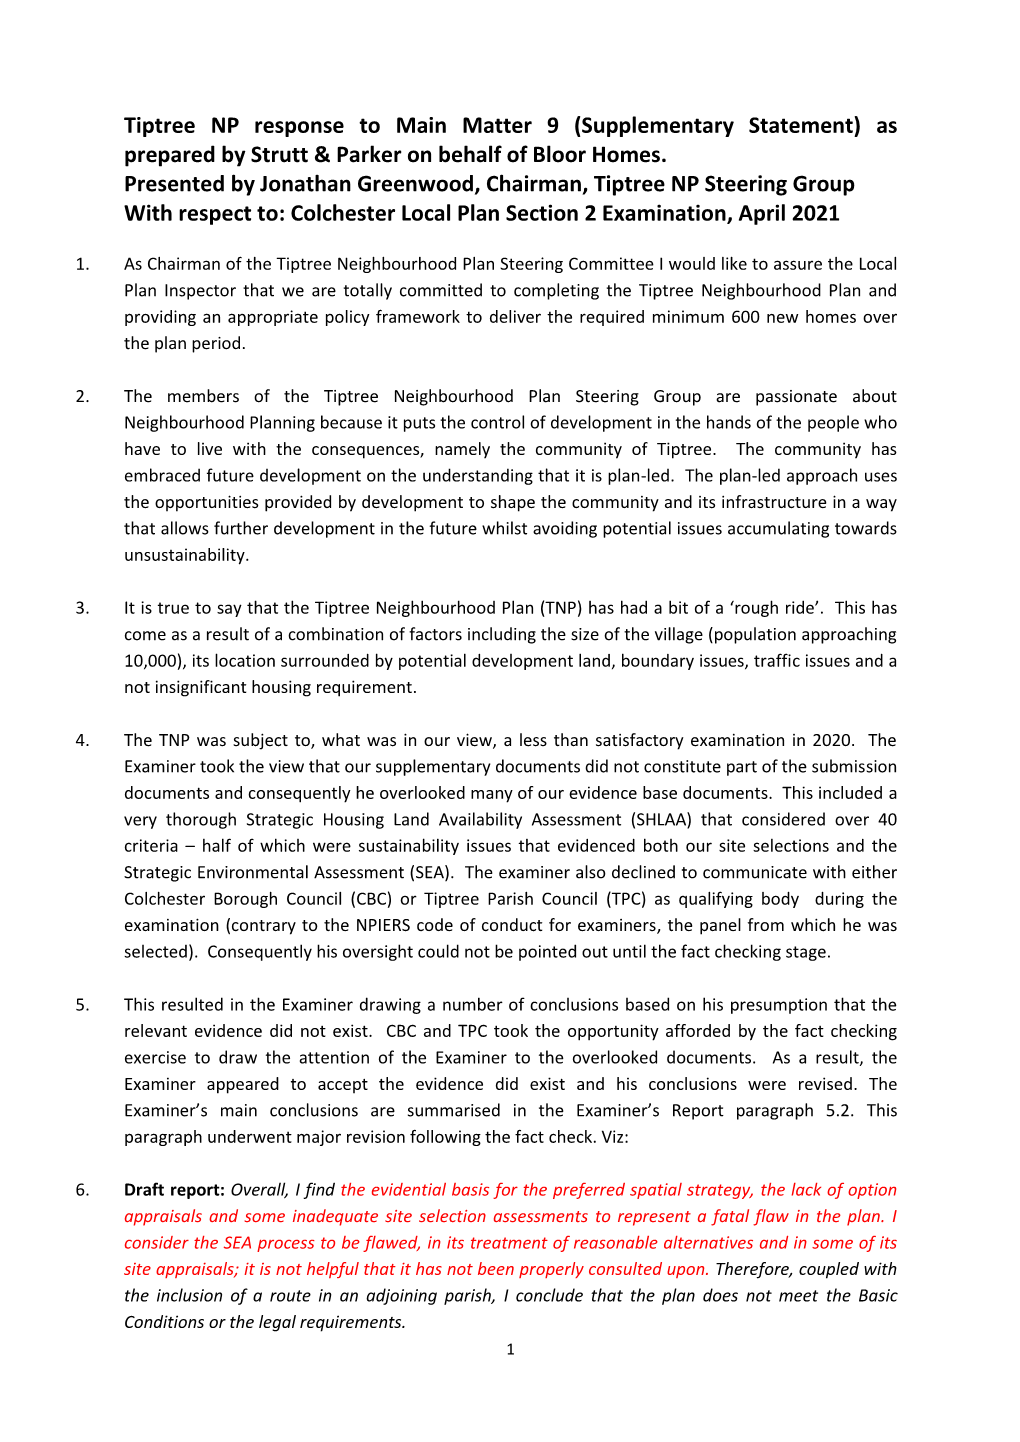 Tiptree NP Response to Main Matter 9 (Supplementary Statement) As Prepared by Strutt & Parker on Behalf of Bloor Homes